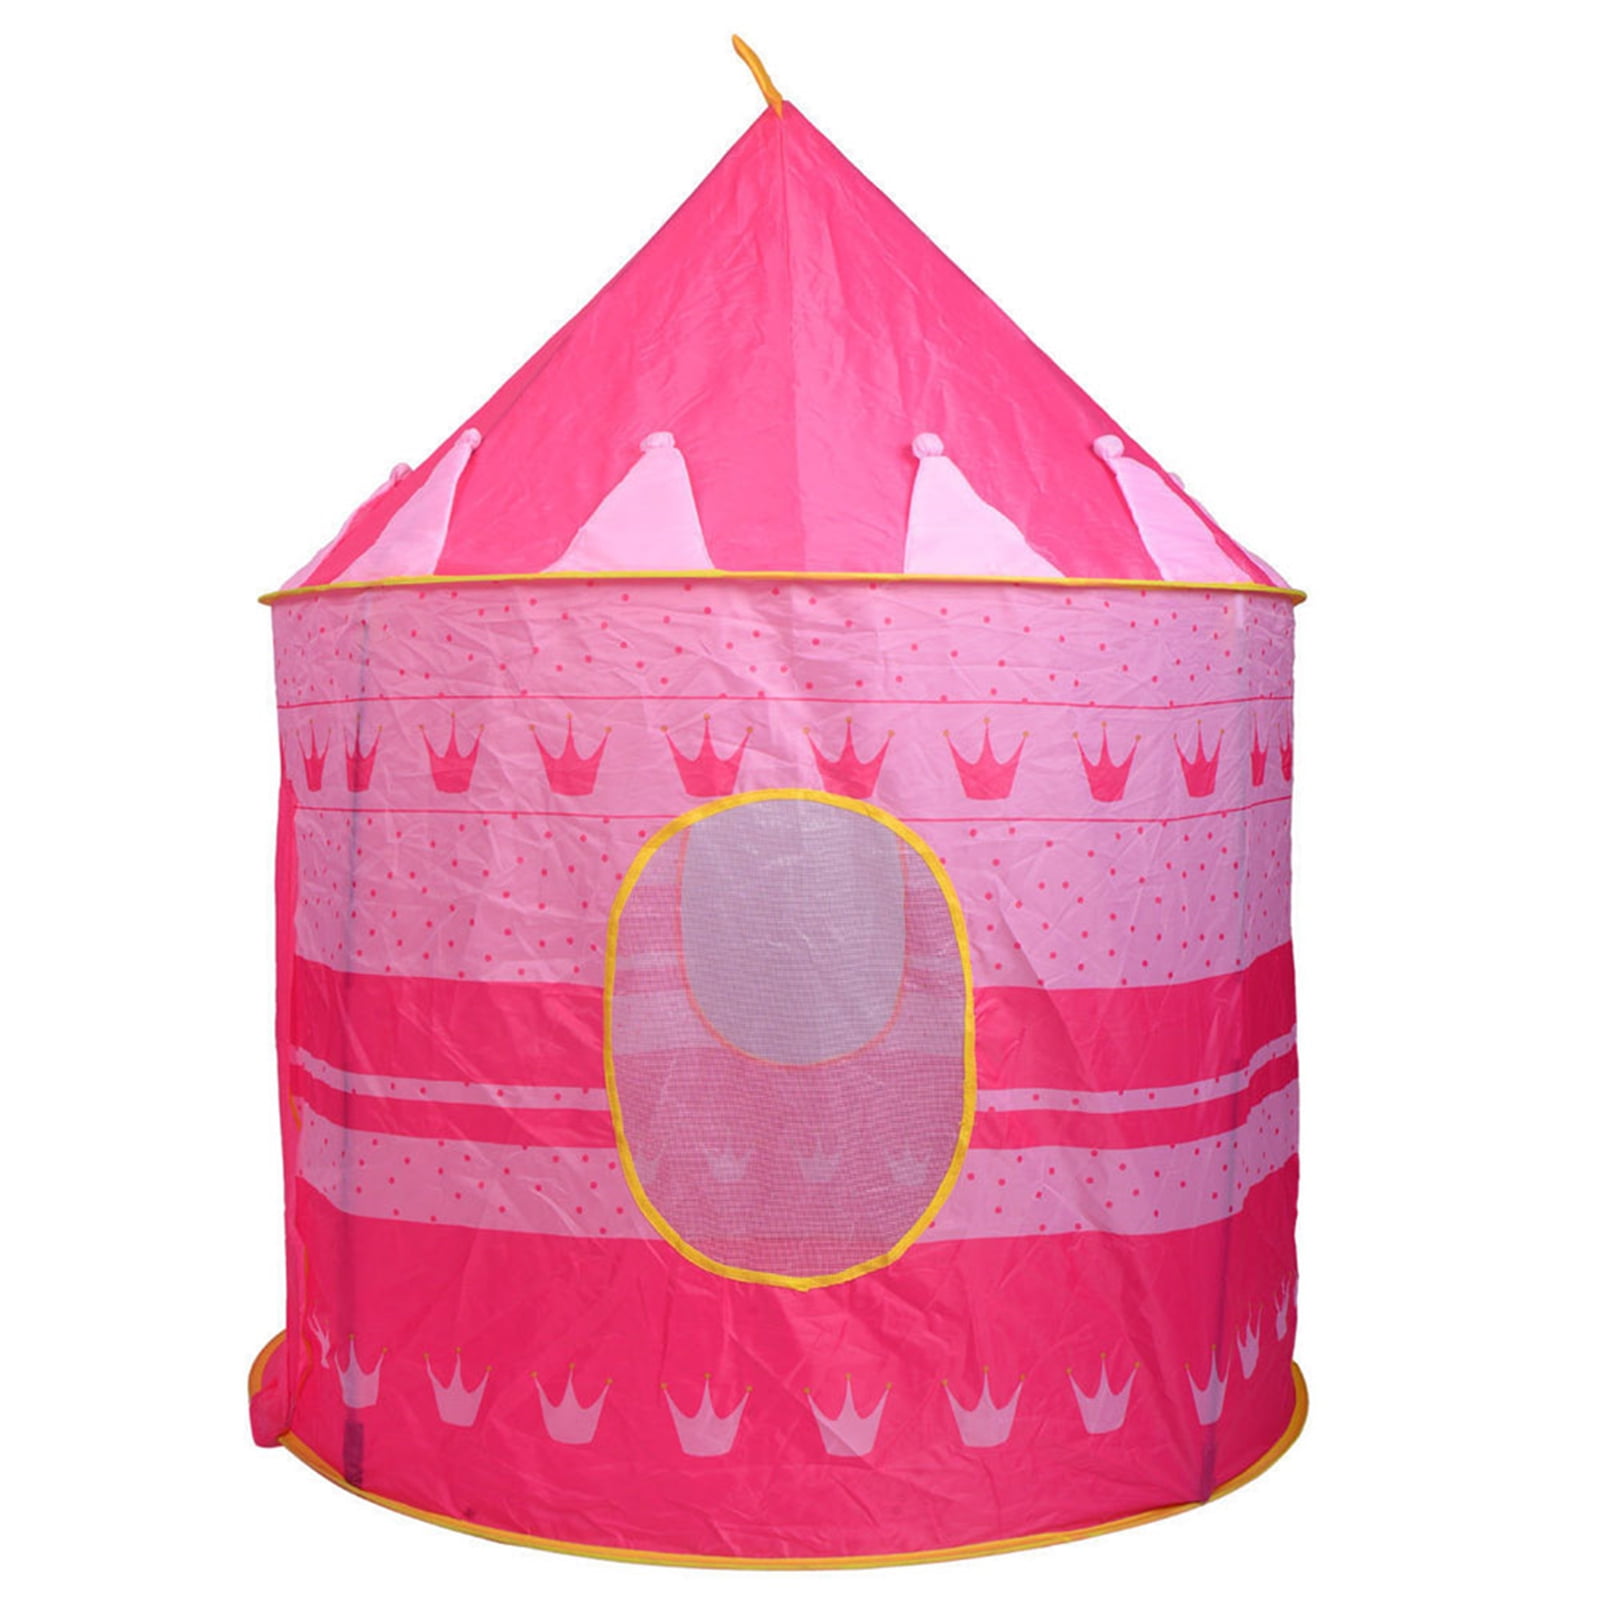 Details about   Kids Play Tent Folding Portable Children Playhouse with Carry Bag for In-Outdoor 